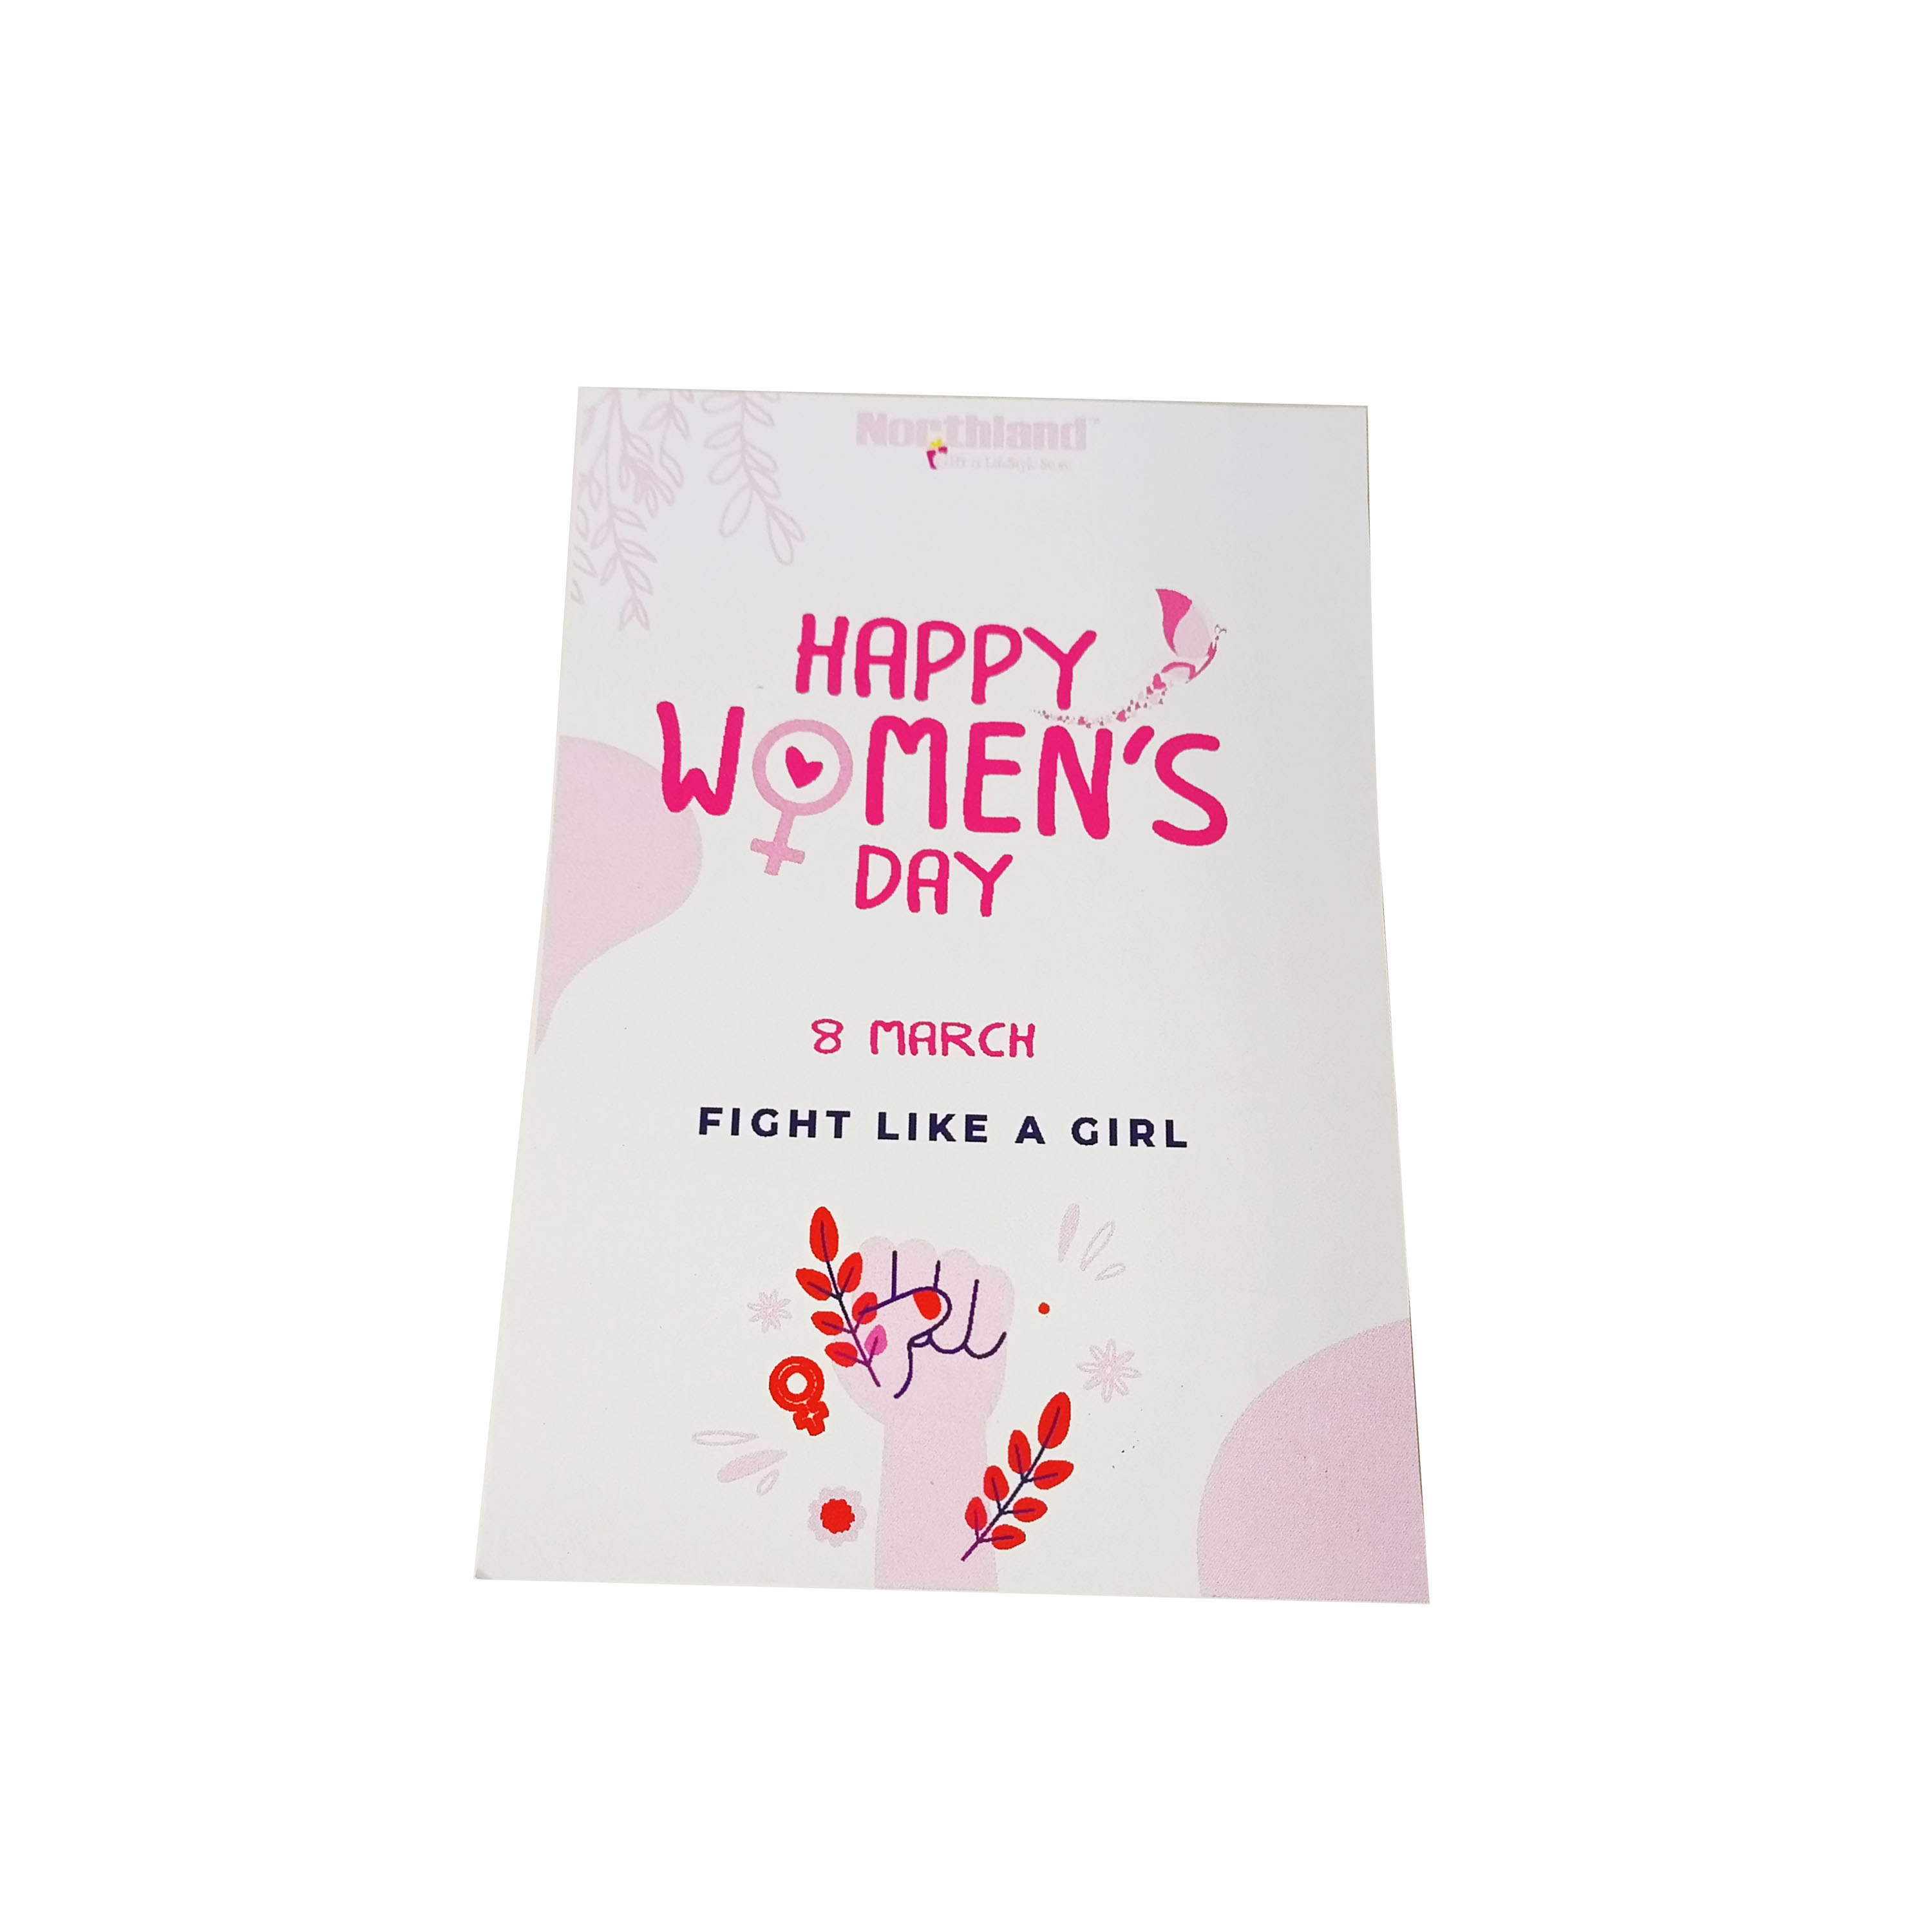 Work Lady Women's Day Corporate Gift Hamper in bulk for corporate gifting |  Promotional Curated Gift Hampers wholesale distributor & supplier in Mumbai  India